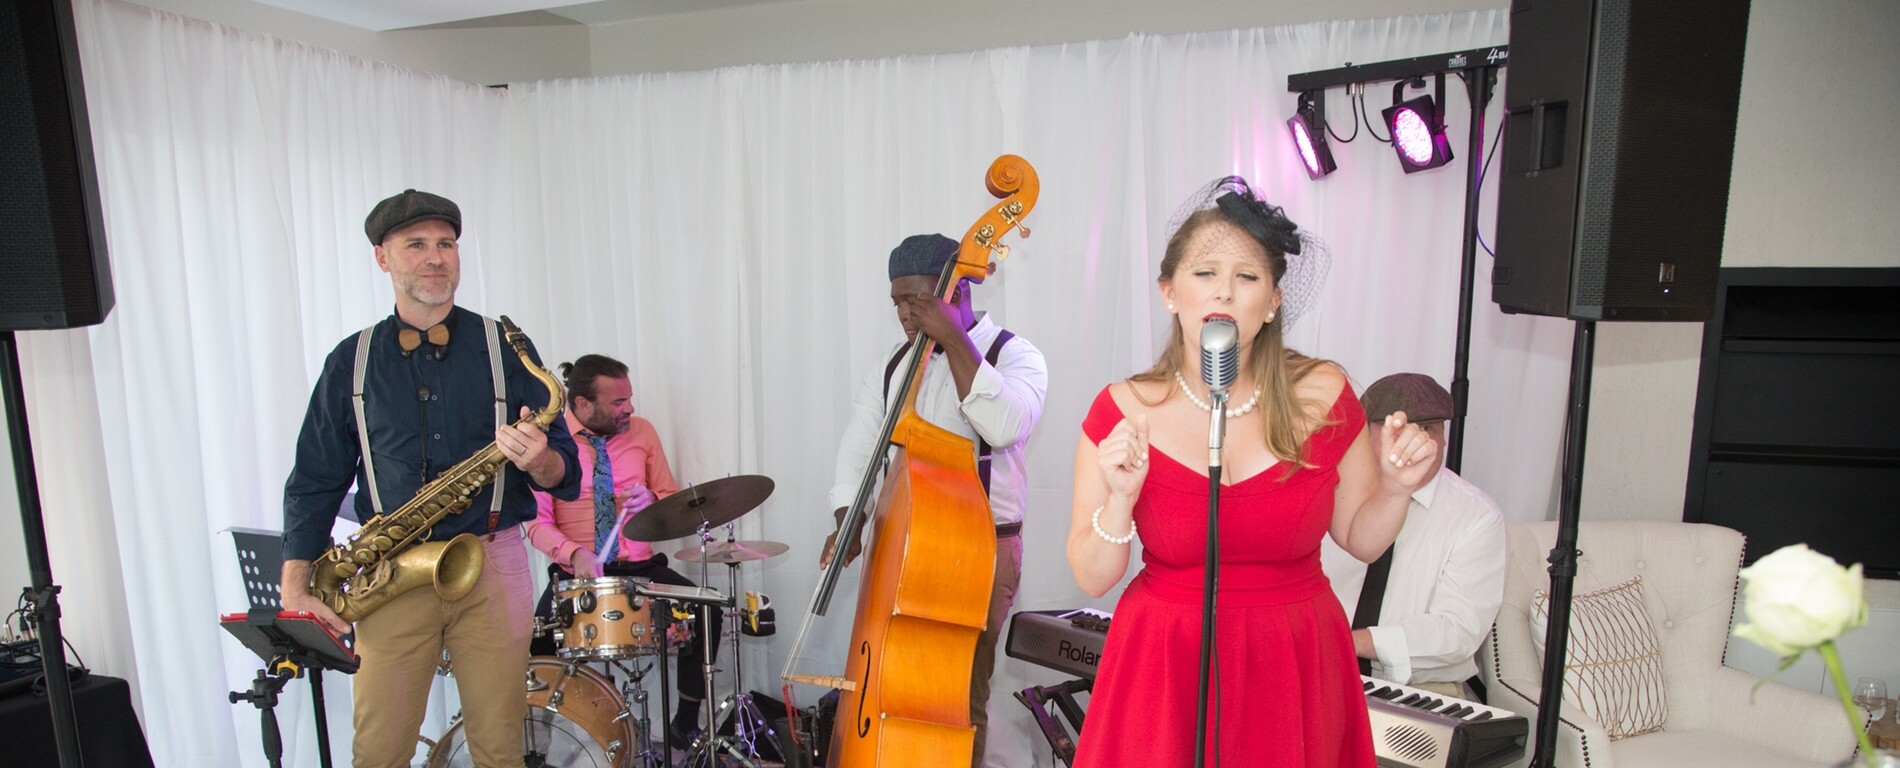 Shout Music Company (Shout MC) | Corporate Event Entertainment Hire: Big Band / Classical Music / DJ's / Jazz Music / Pop Music / Moonshine / Solo Artists / Singers / +More